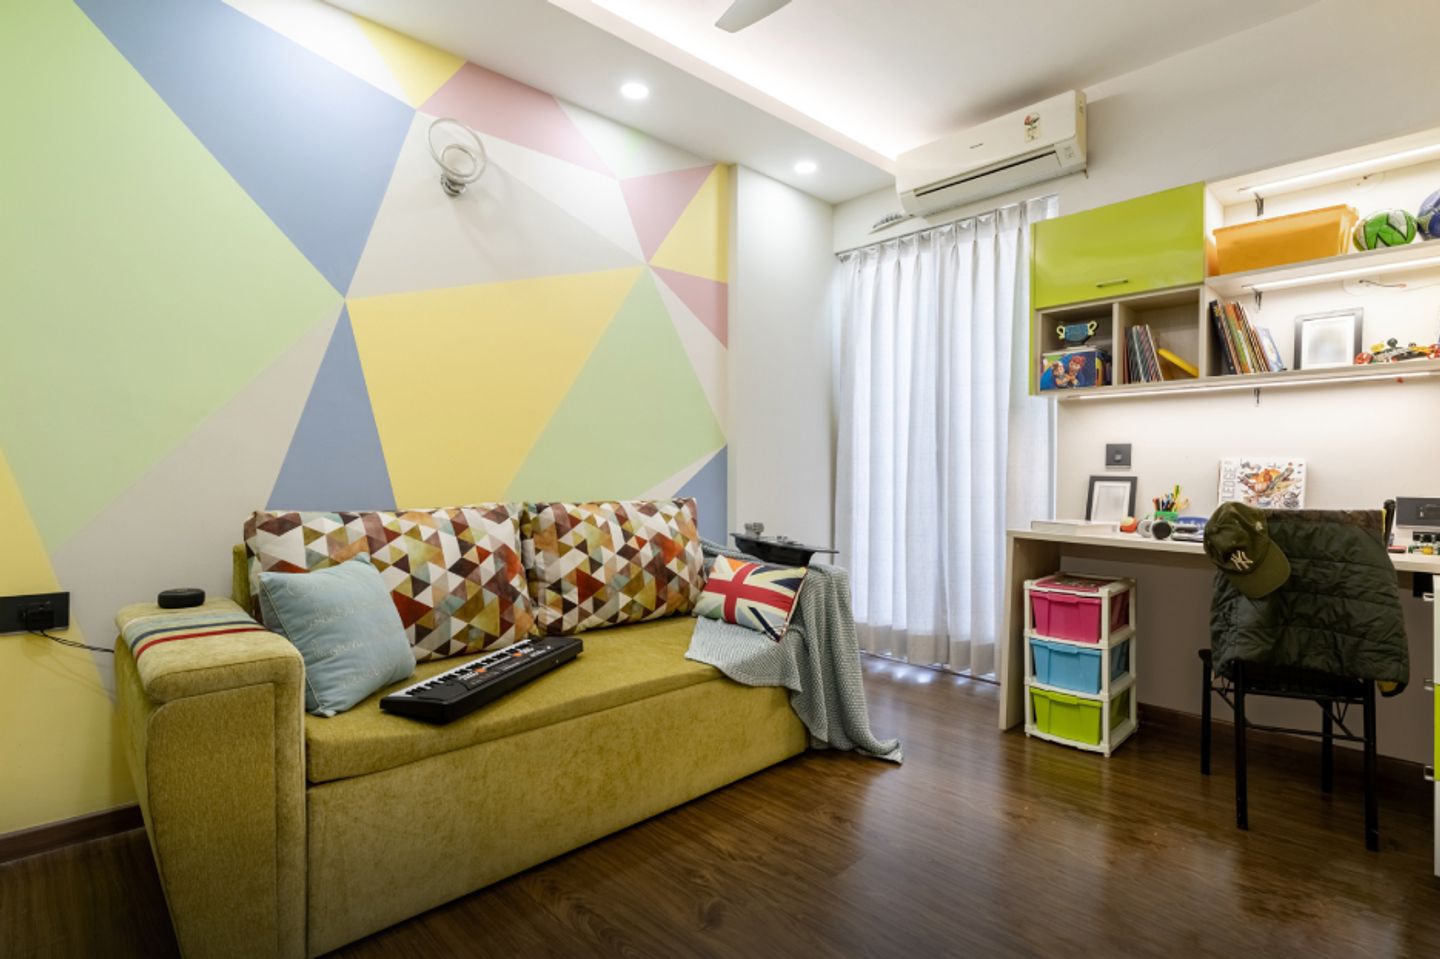 Modern Accent Wall Paint Design With Geometric Patterns